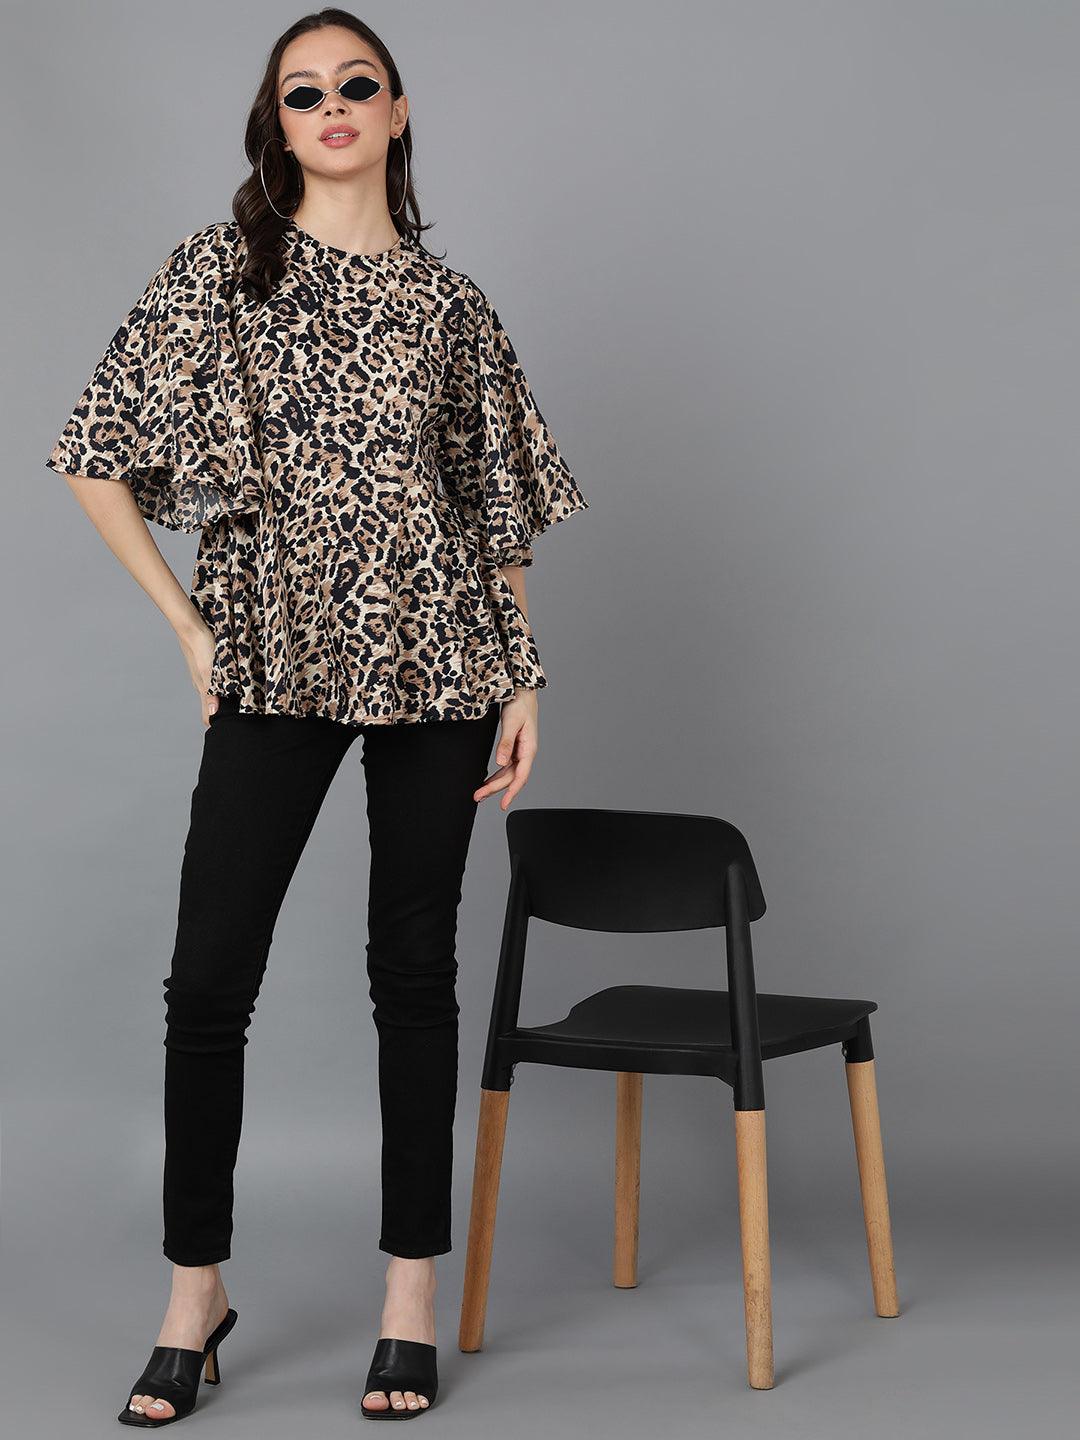 Beige Animal Printed Top With Flared Sleeve - Znxclothing